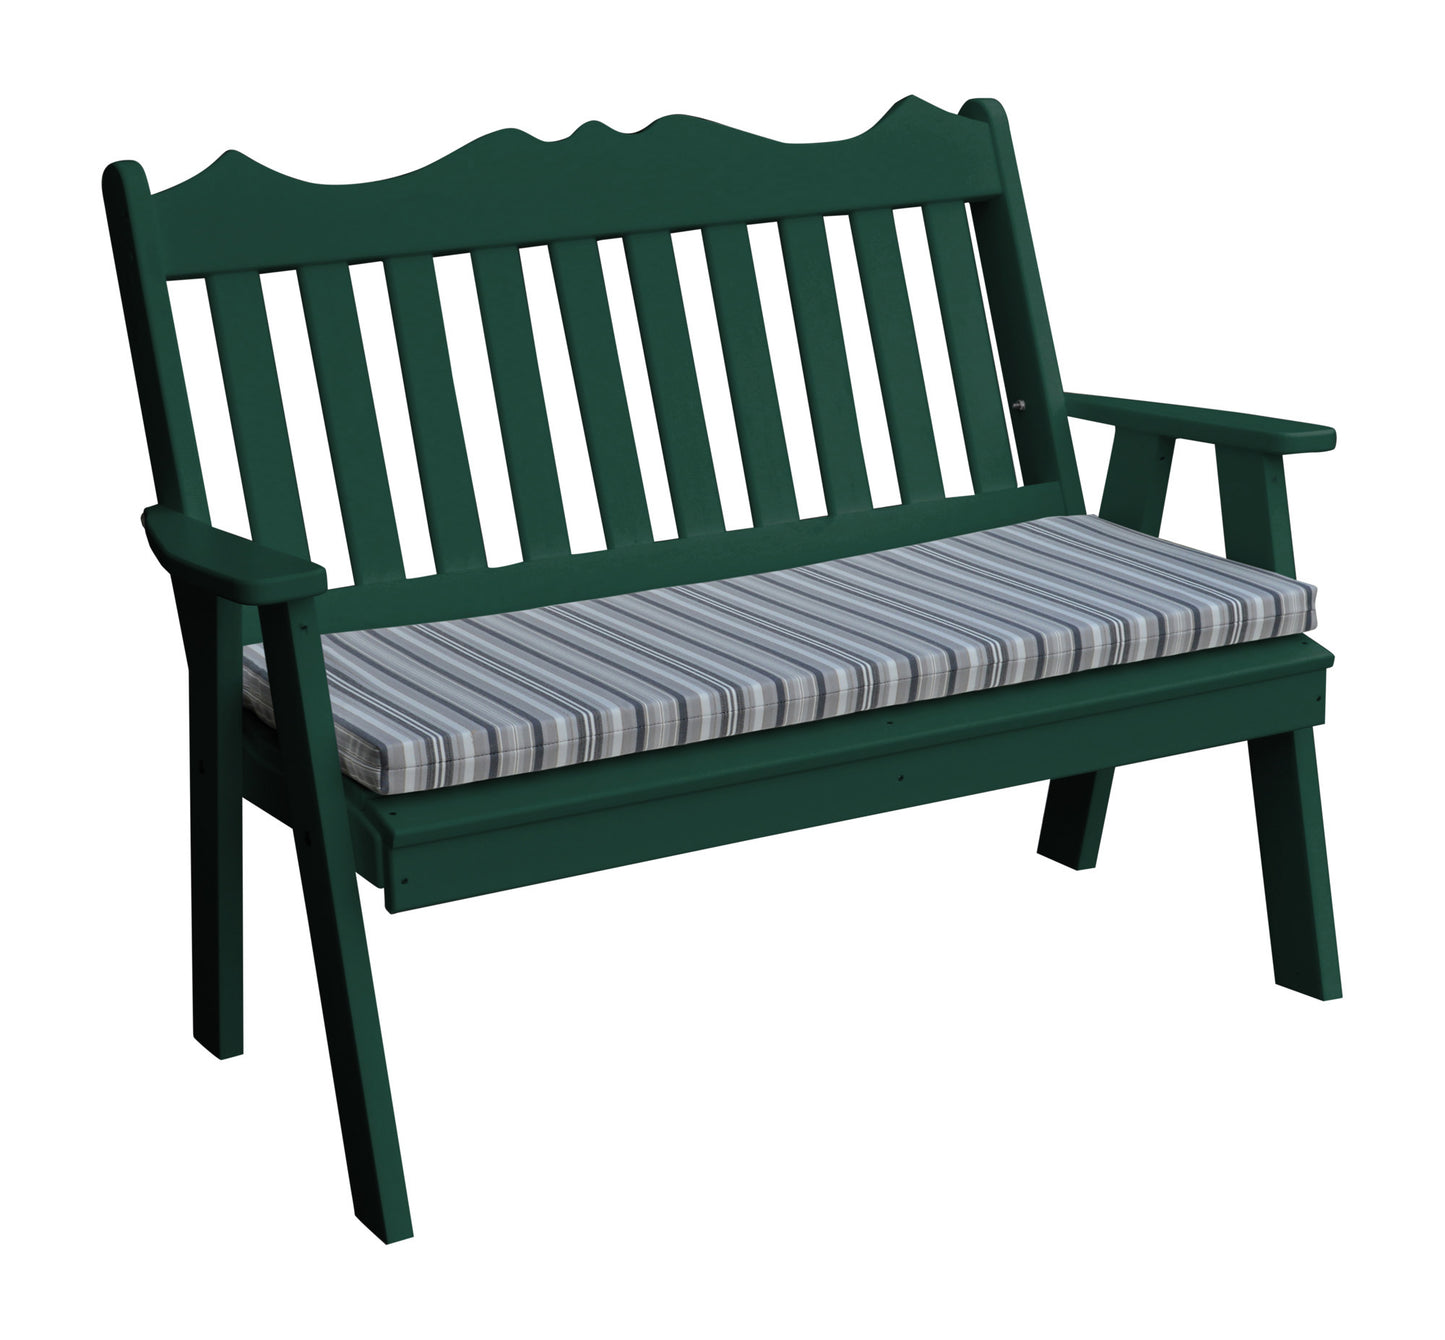 A&L Furniture Company Recycled Plastic 4' Royal English Garden Bench - LEAD TIME TO SHIP 10 BUSINESS DAYS